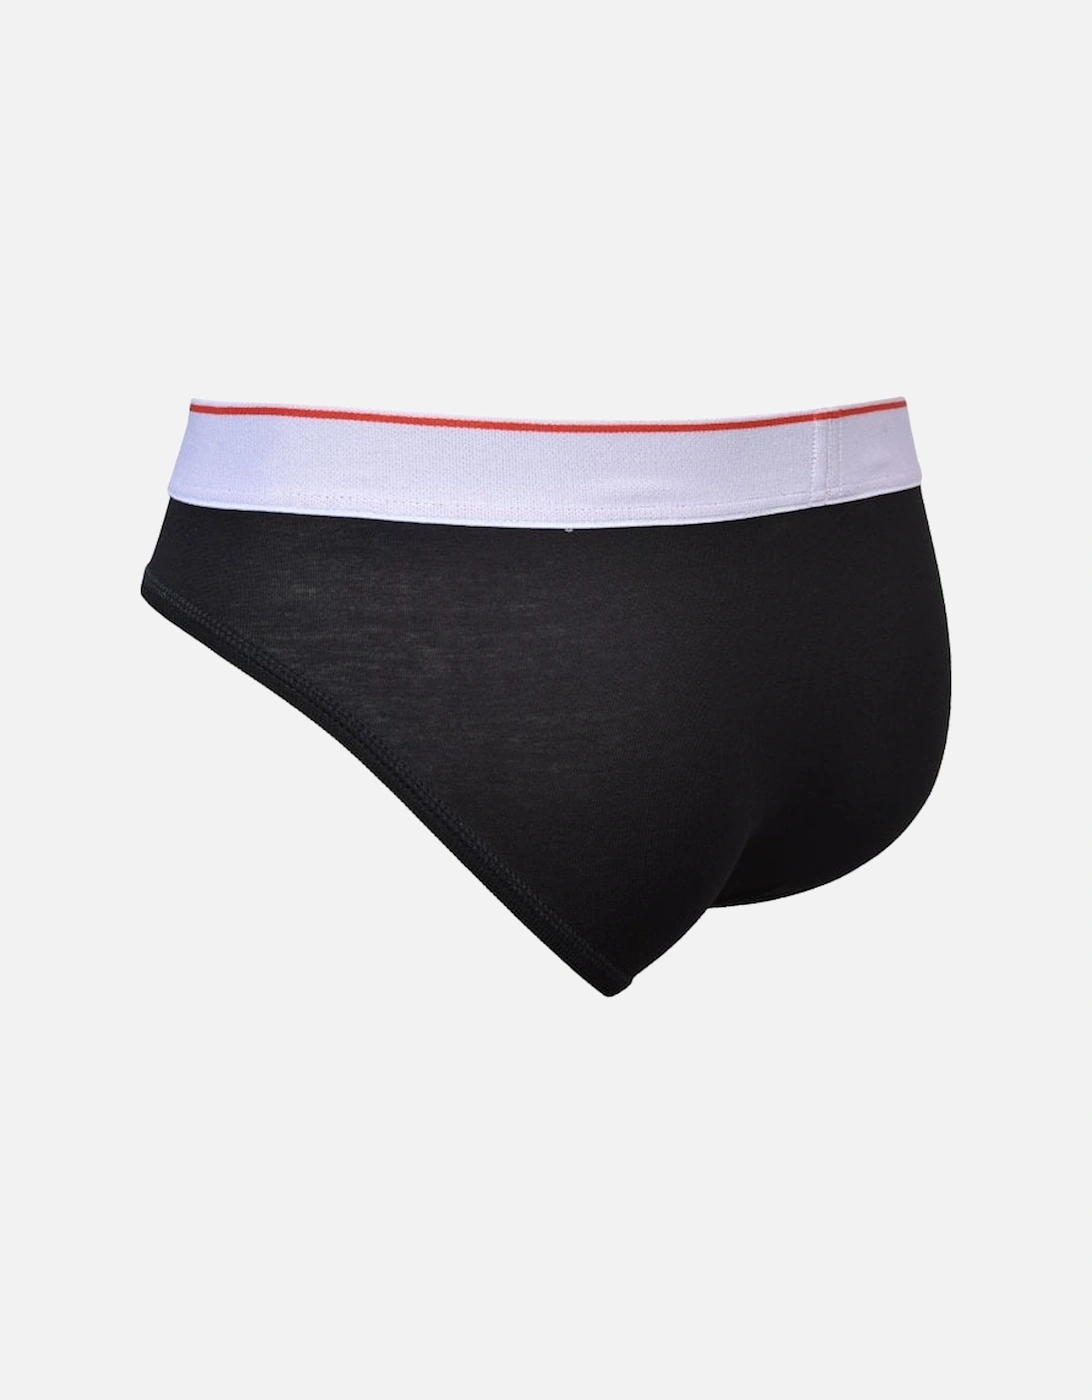 Made With Love Logo Brief, Black